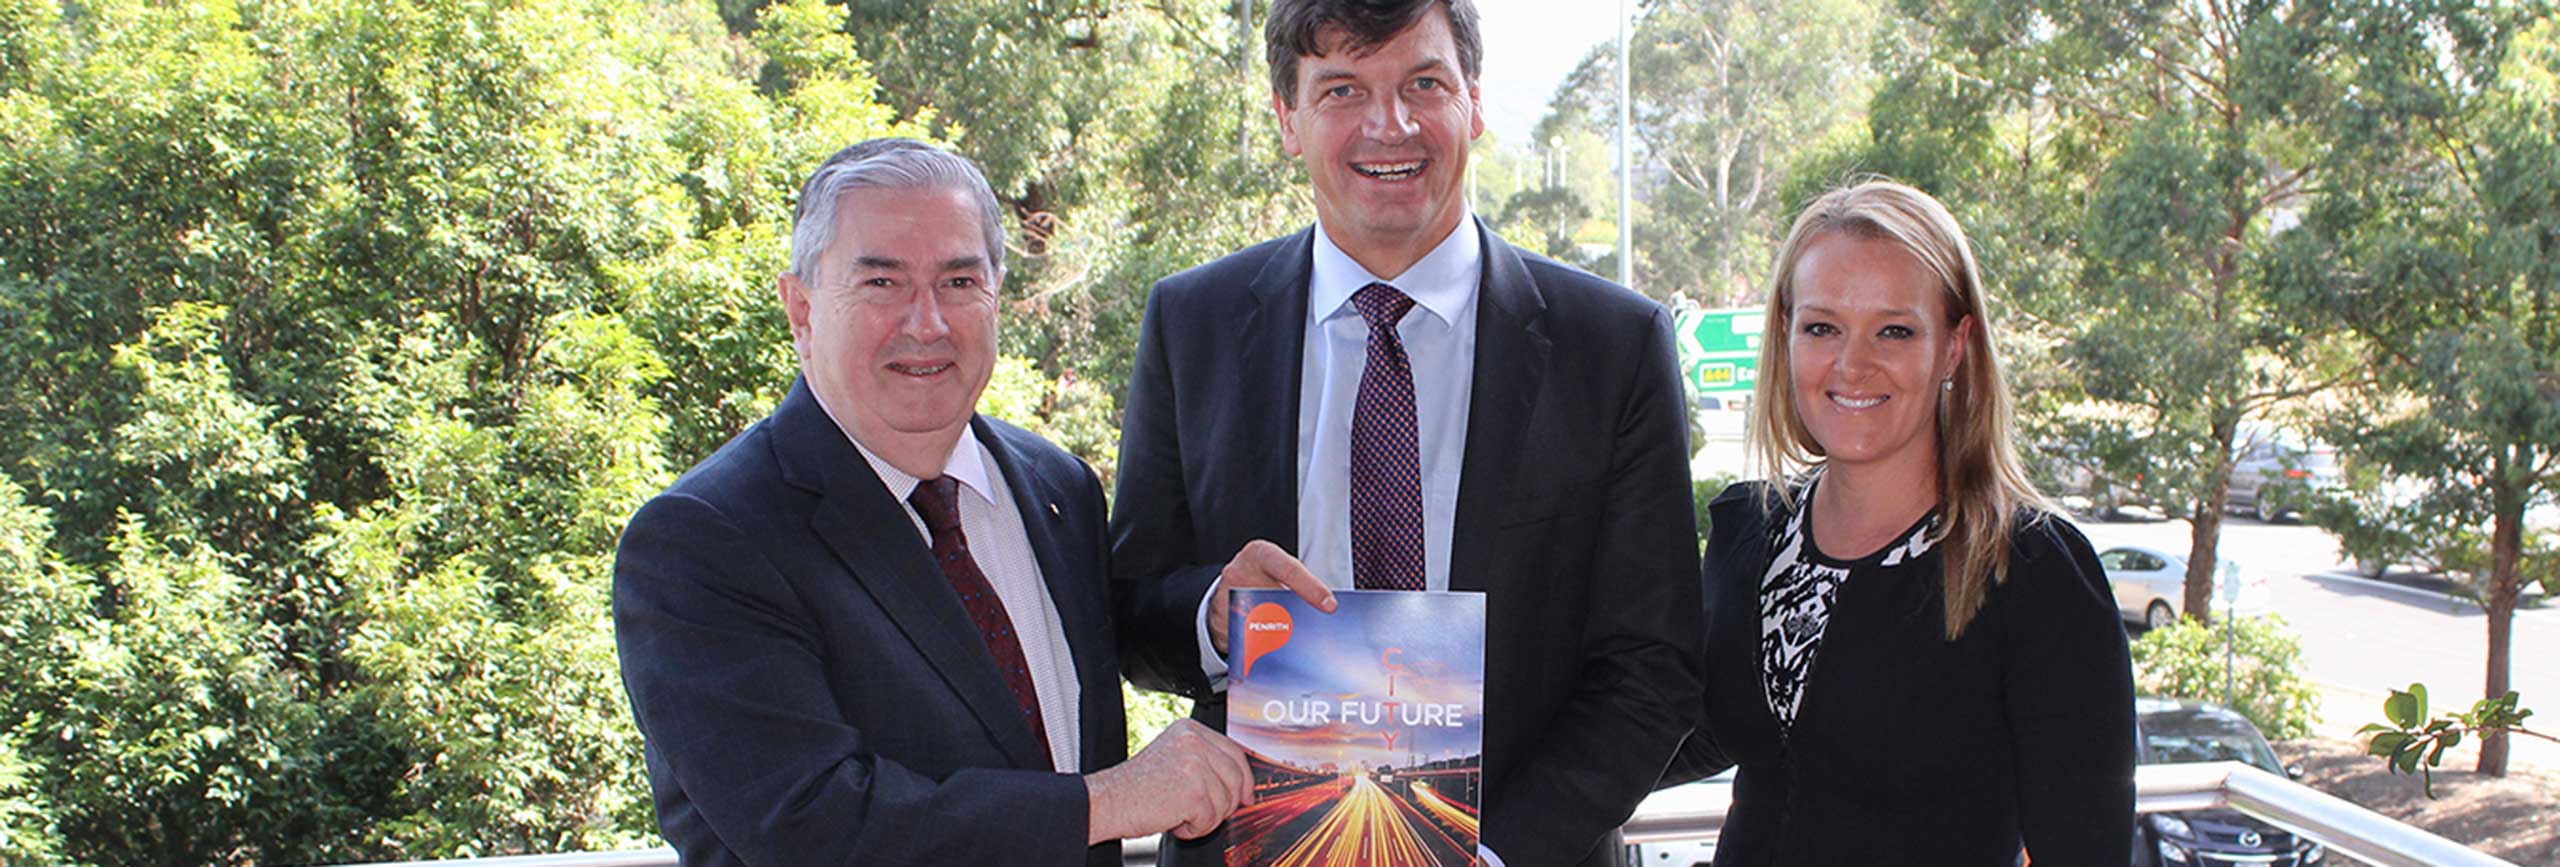 Deputy Mayor Ross Fowler OAM presented Council's 2016 Priorities document to Assistant Minister for Cities and Digital Transformation and Member for Hume Angus Taylor MP, who was invited to Penrith by Lindsay MP Fiona Scott.